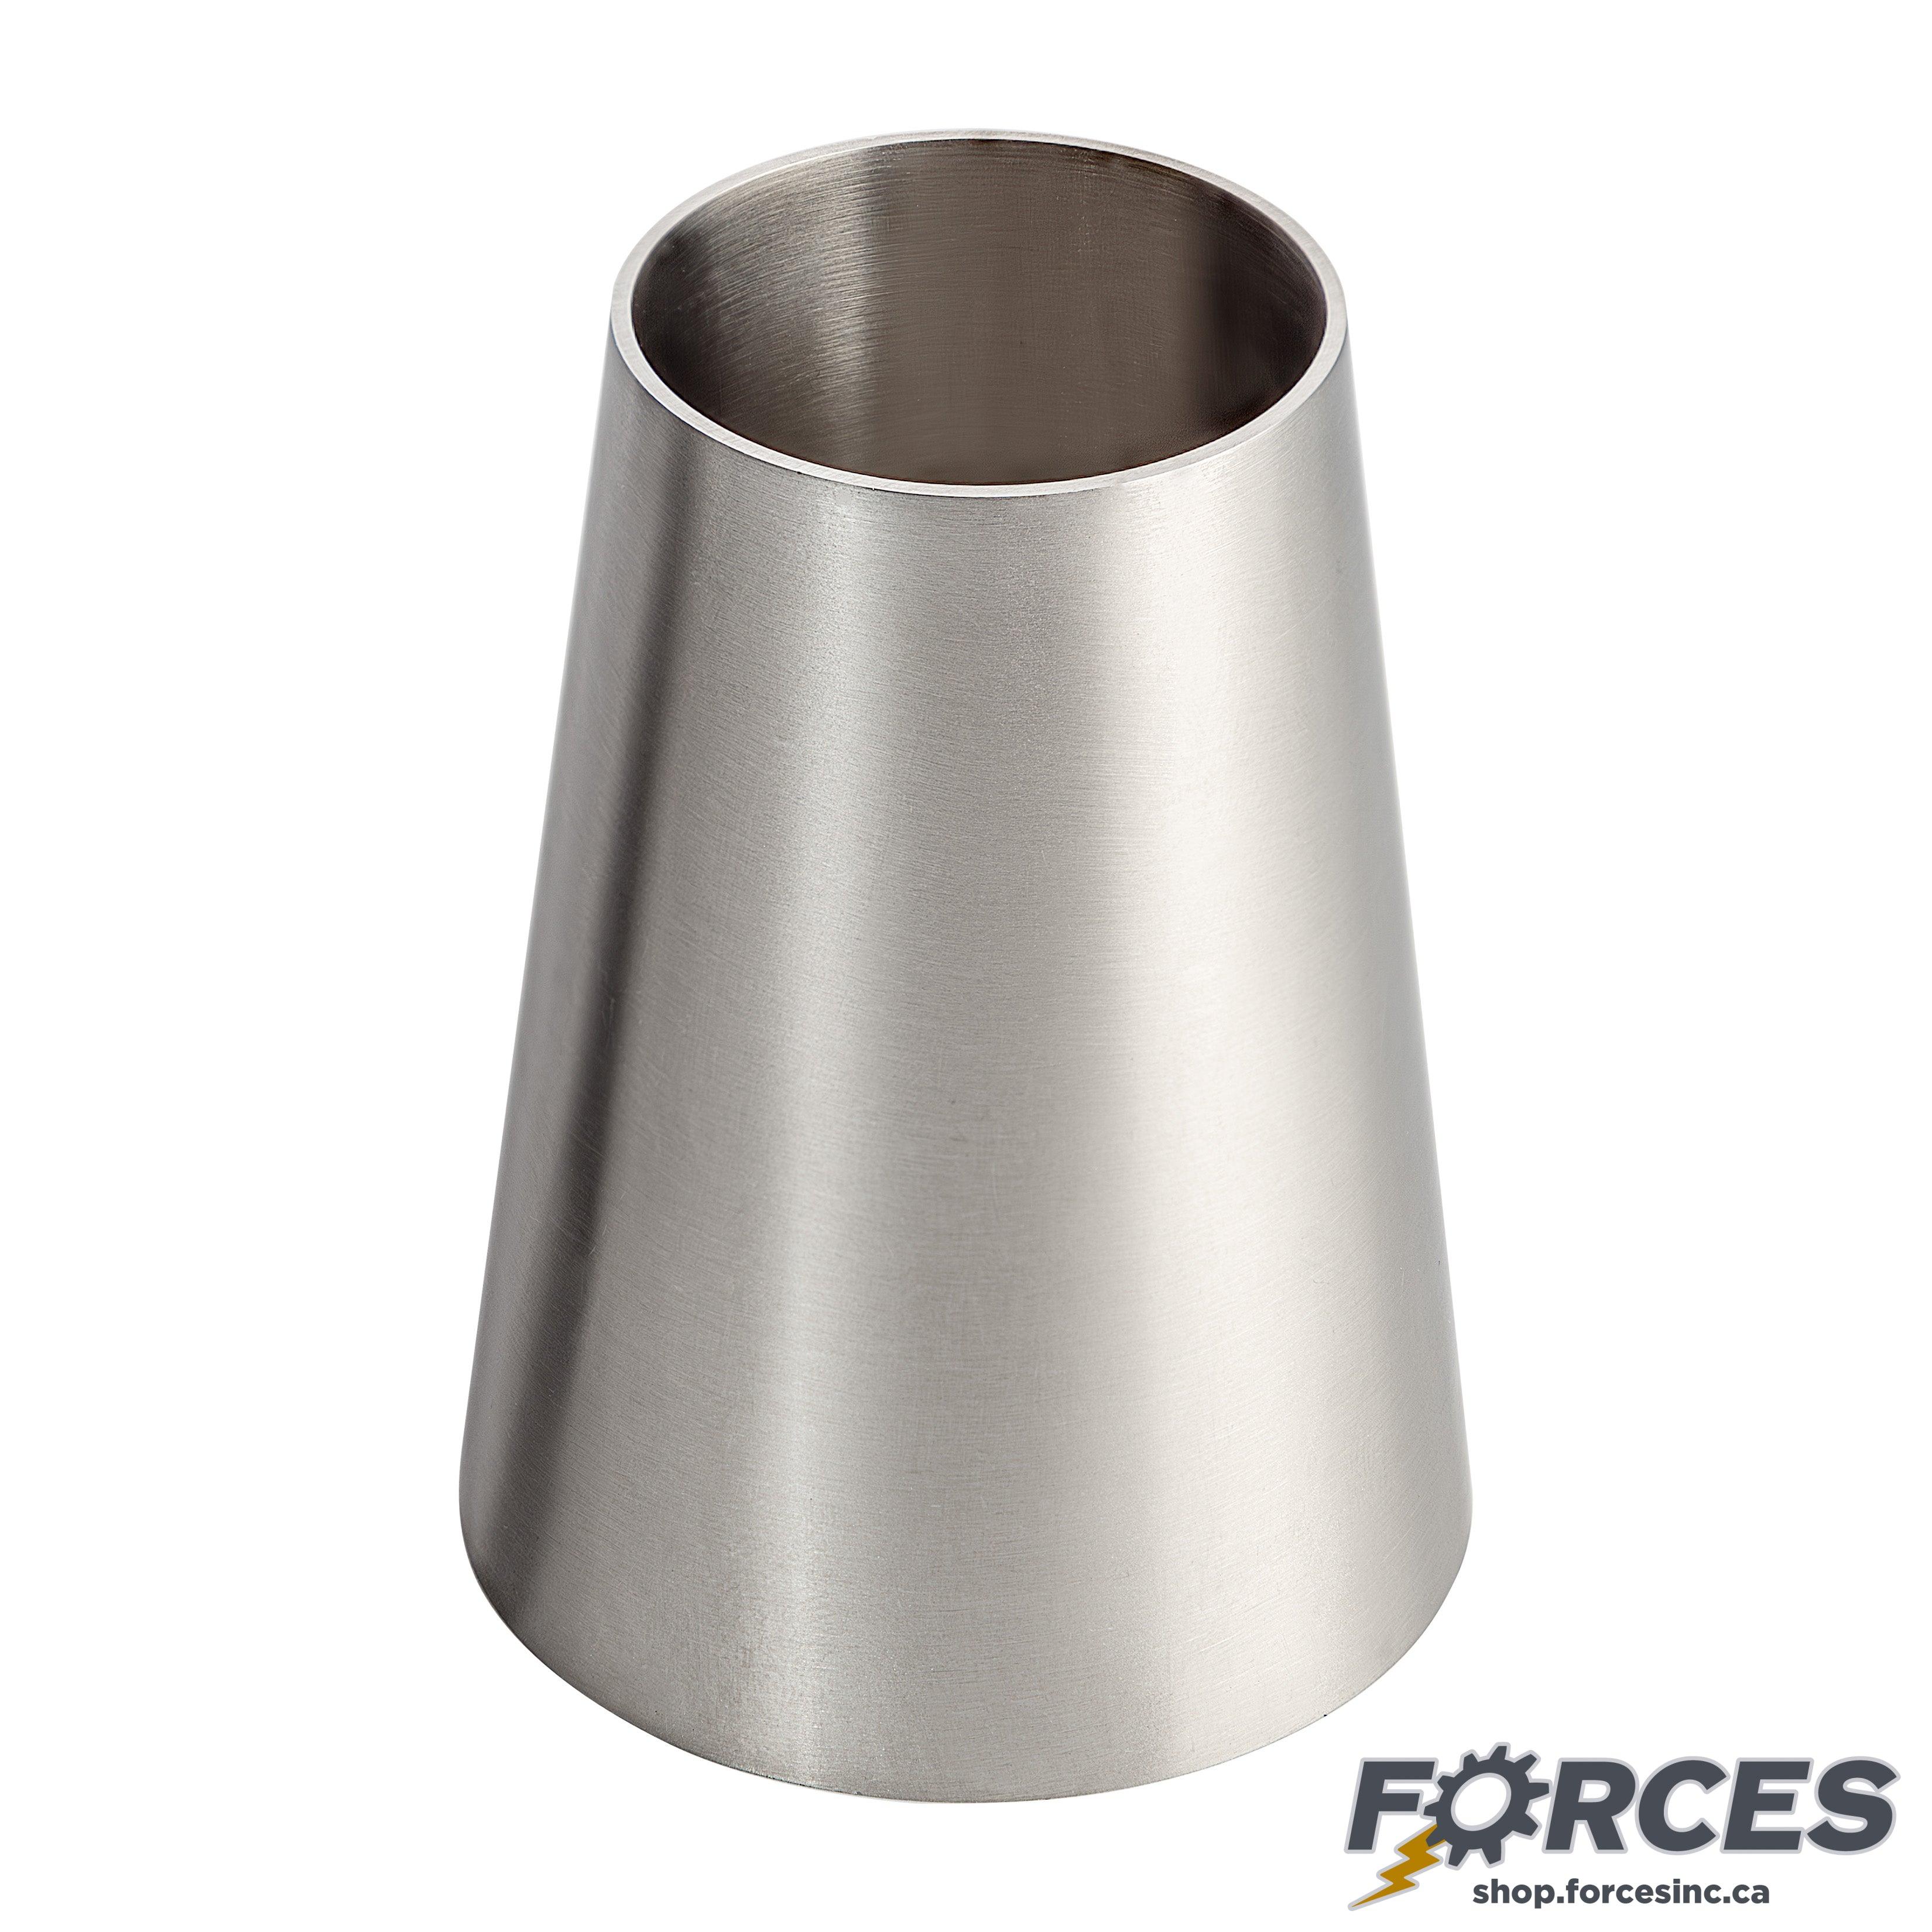 3-7/8" x 3" Butt Weld Concentric Reducer - Stainless Steel 304 - Forces Inc